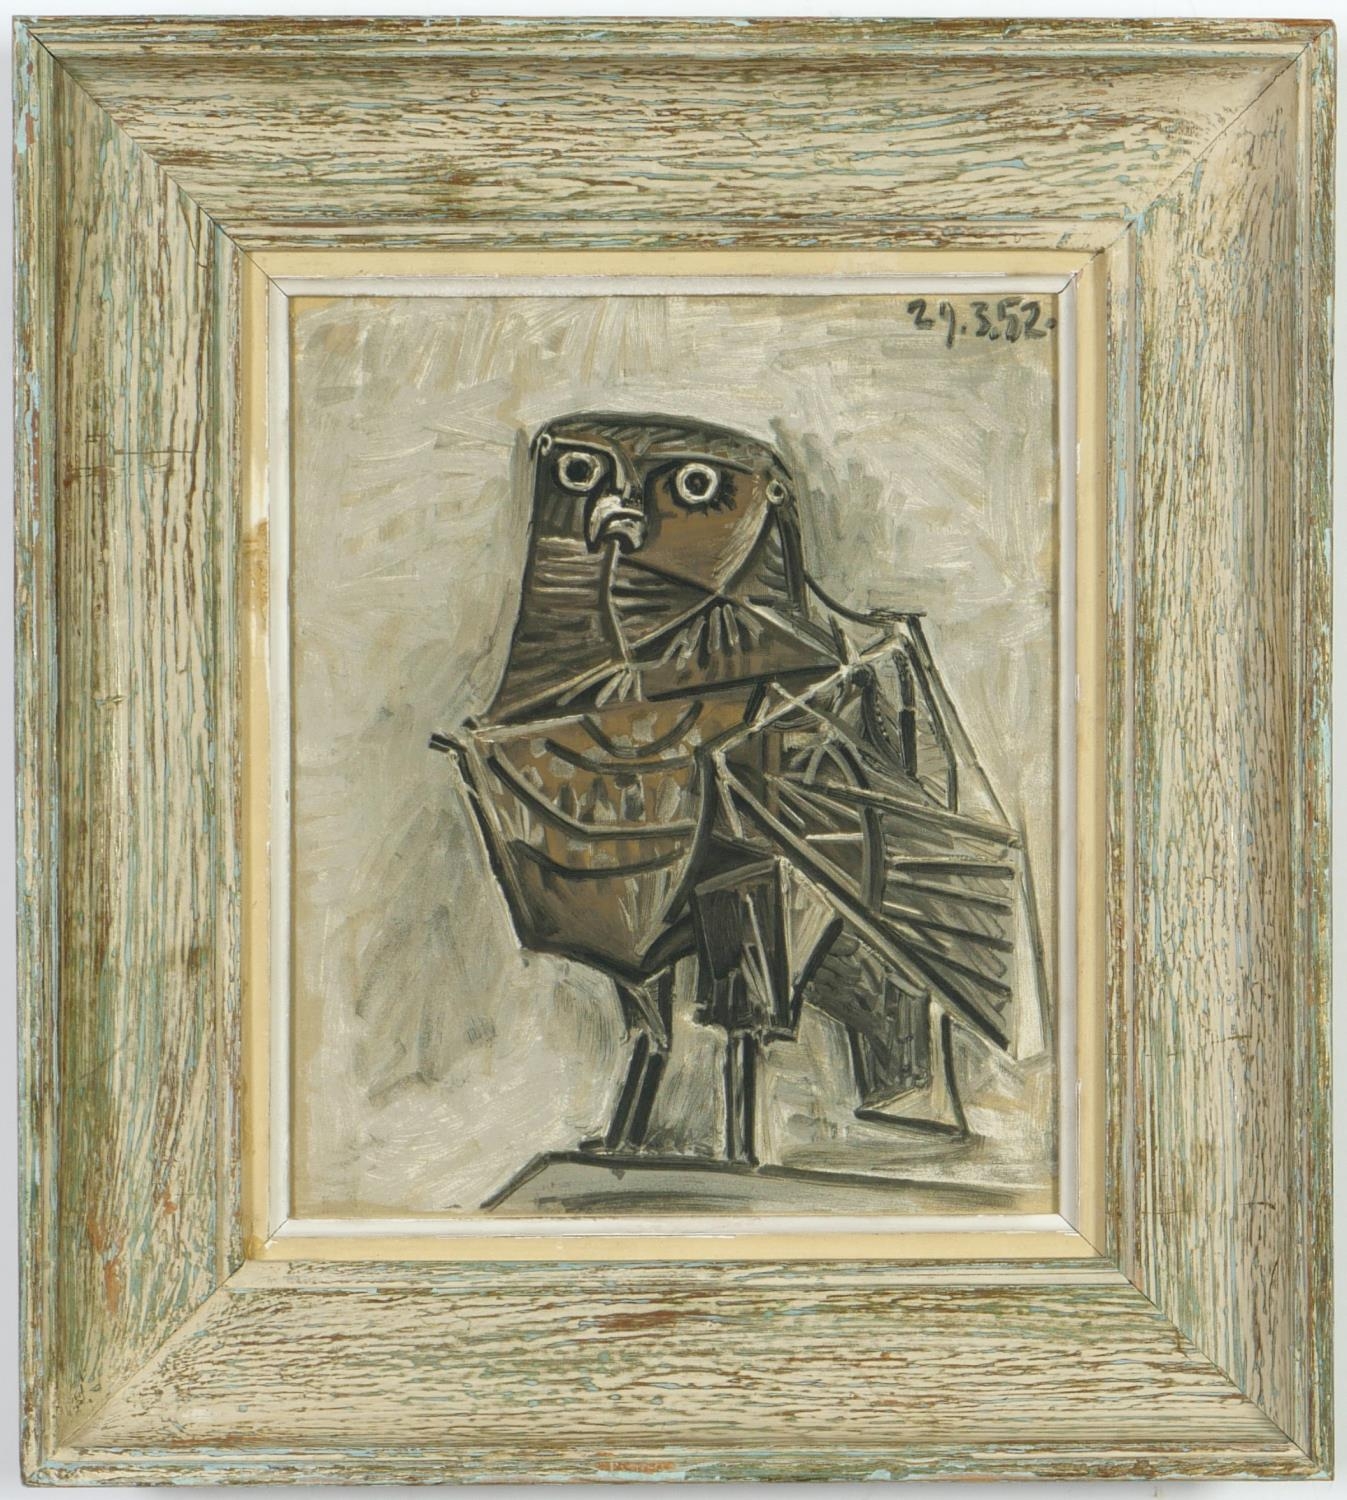 PABLO PICASSO, The Owl, lithograph 1954, vintage French frame, 37cm x 27cm.